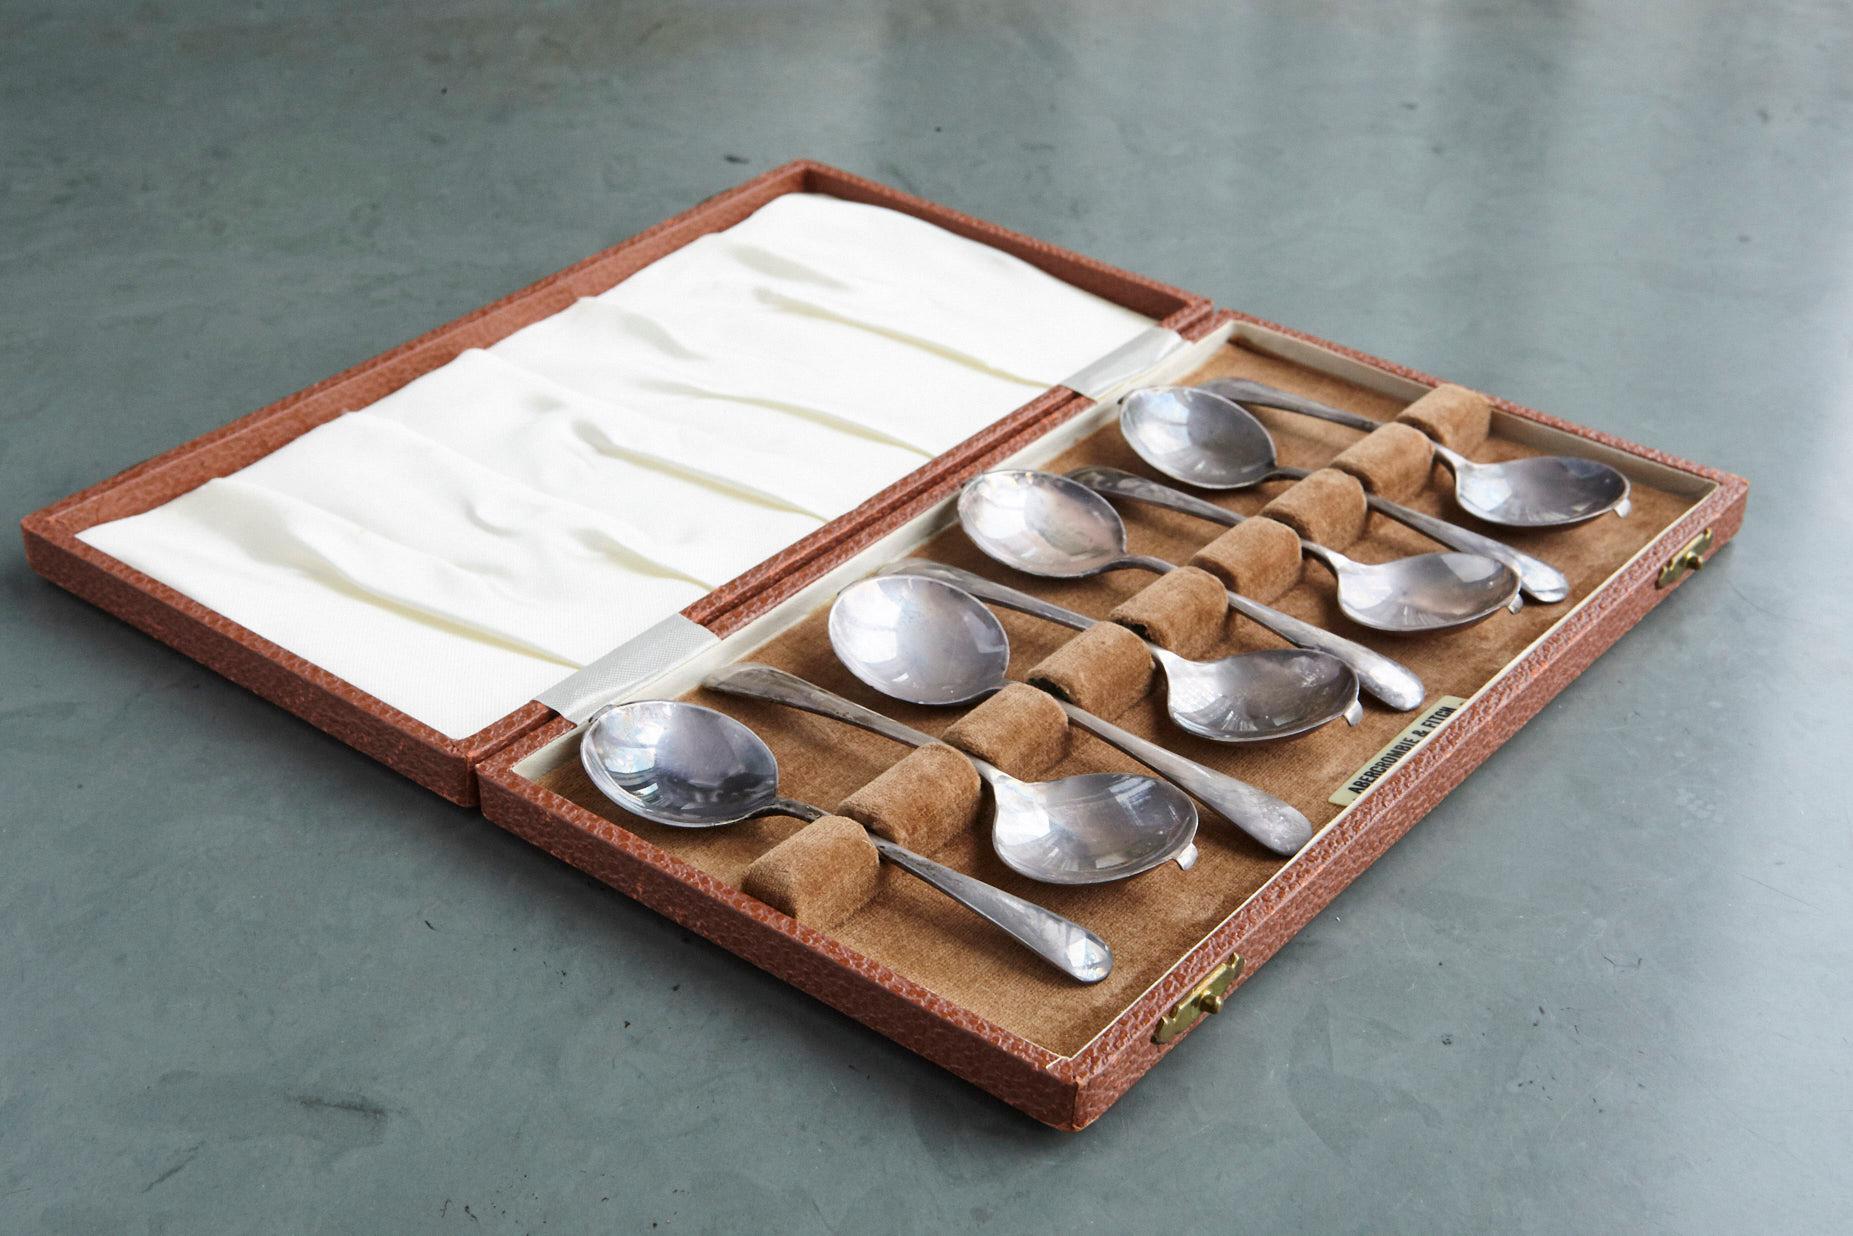 English Set of 8 Silver Plated Cafe Diable Spoons, Abercrombie & Fitch England, 1915s